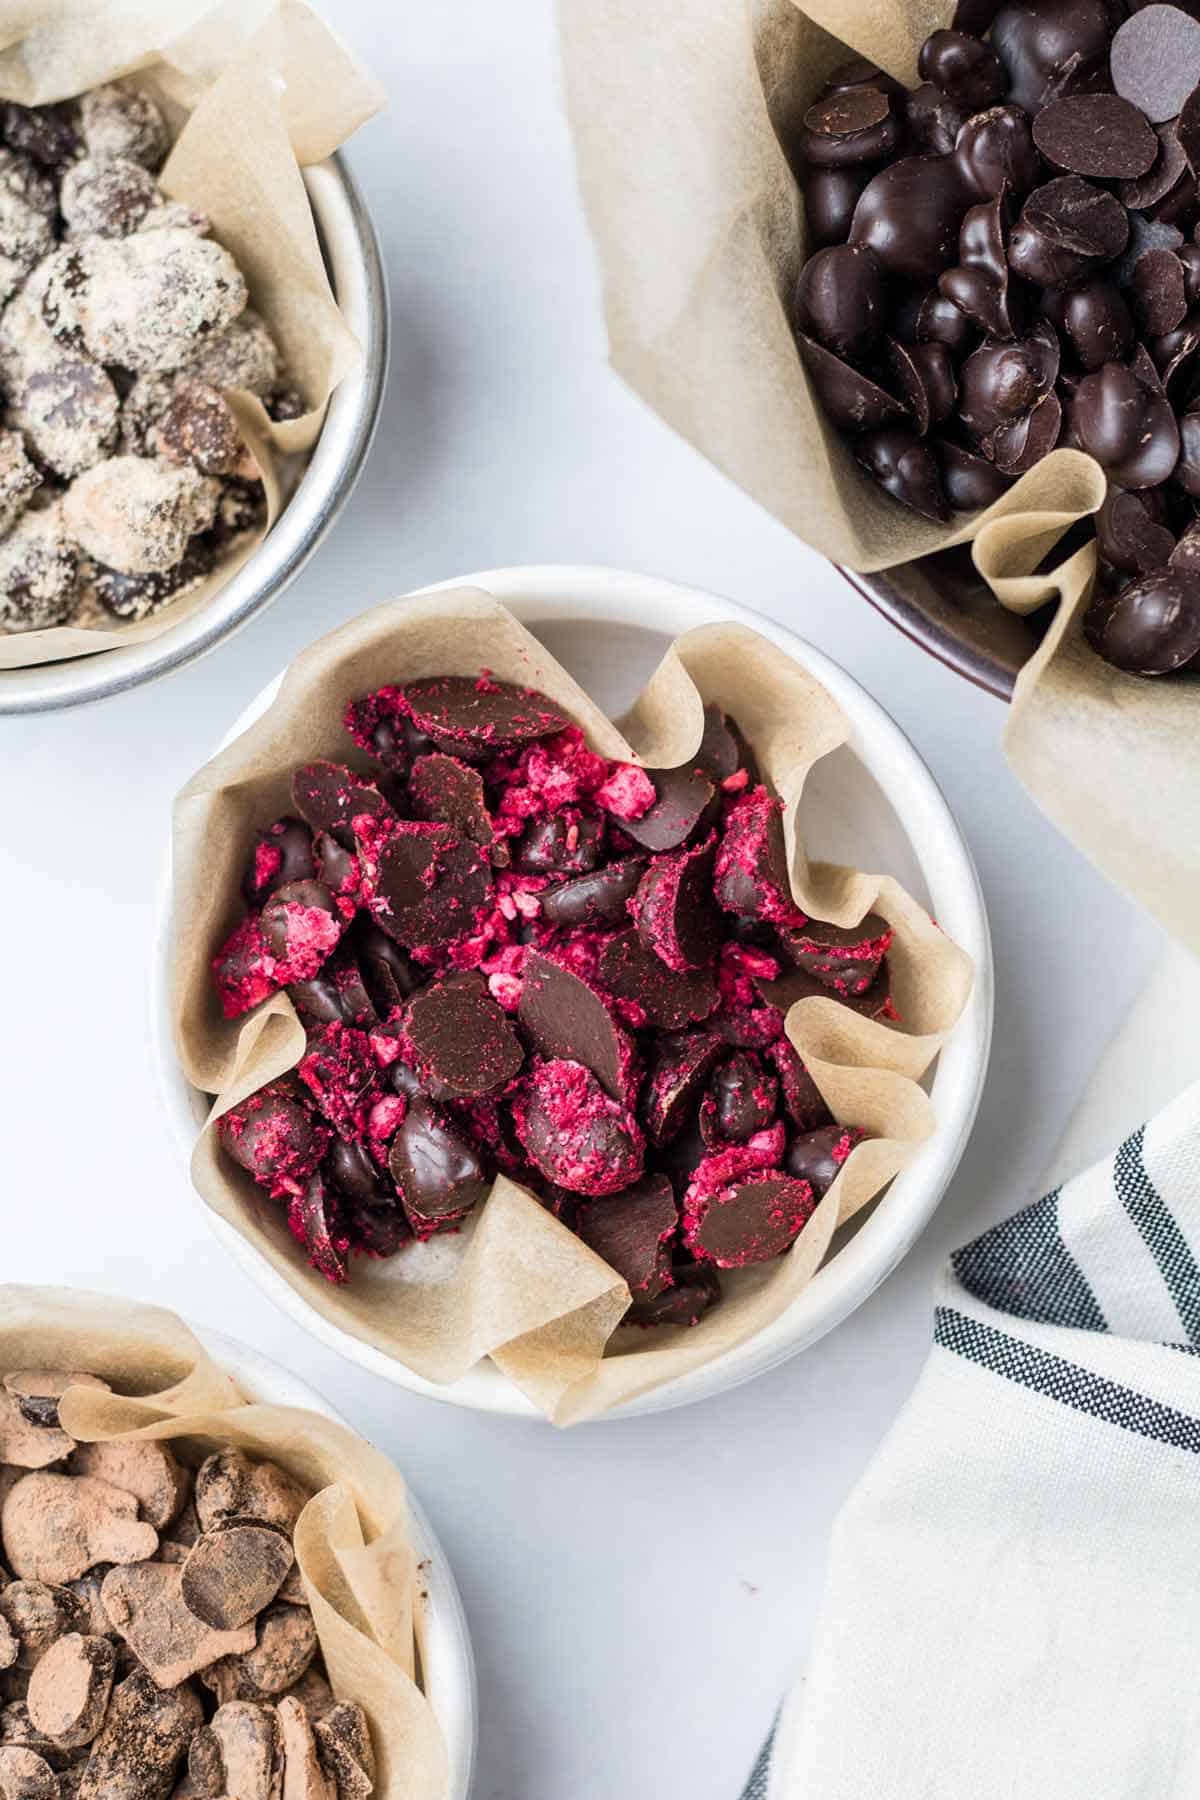 Multiple small parchment lined bowls of chocolate covered espresso beans with each bowl containing different toppings.